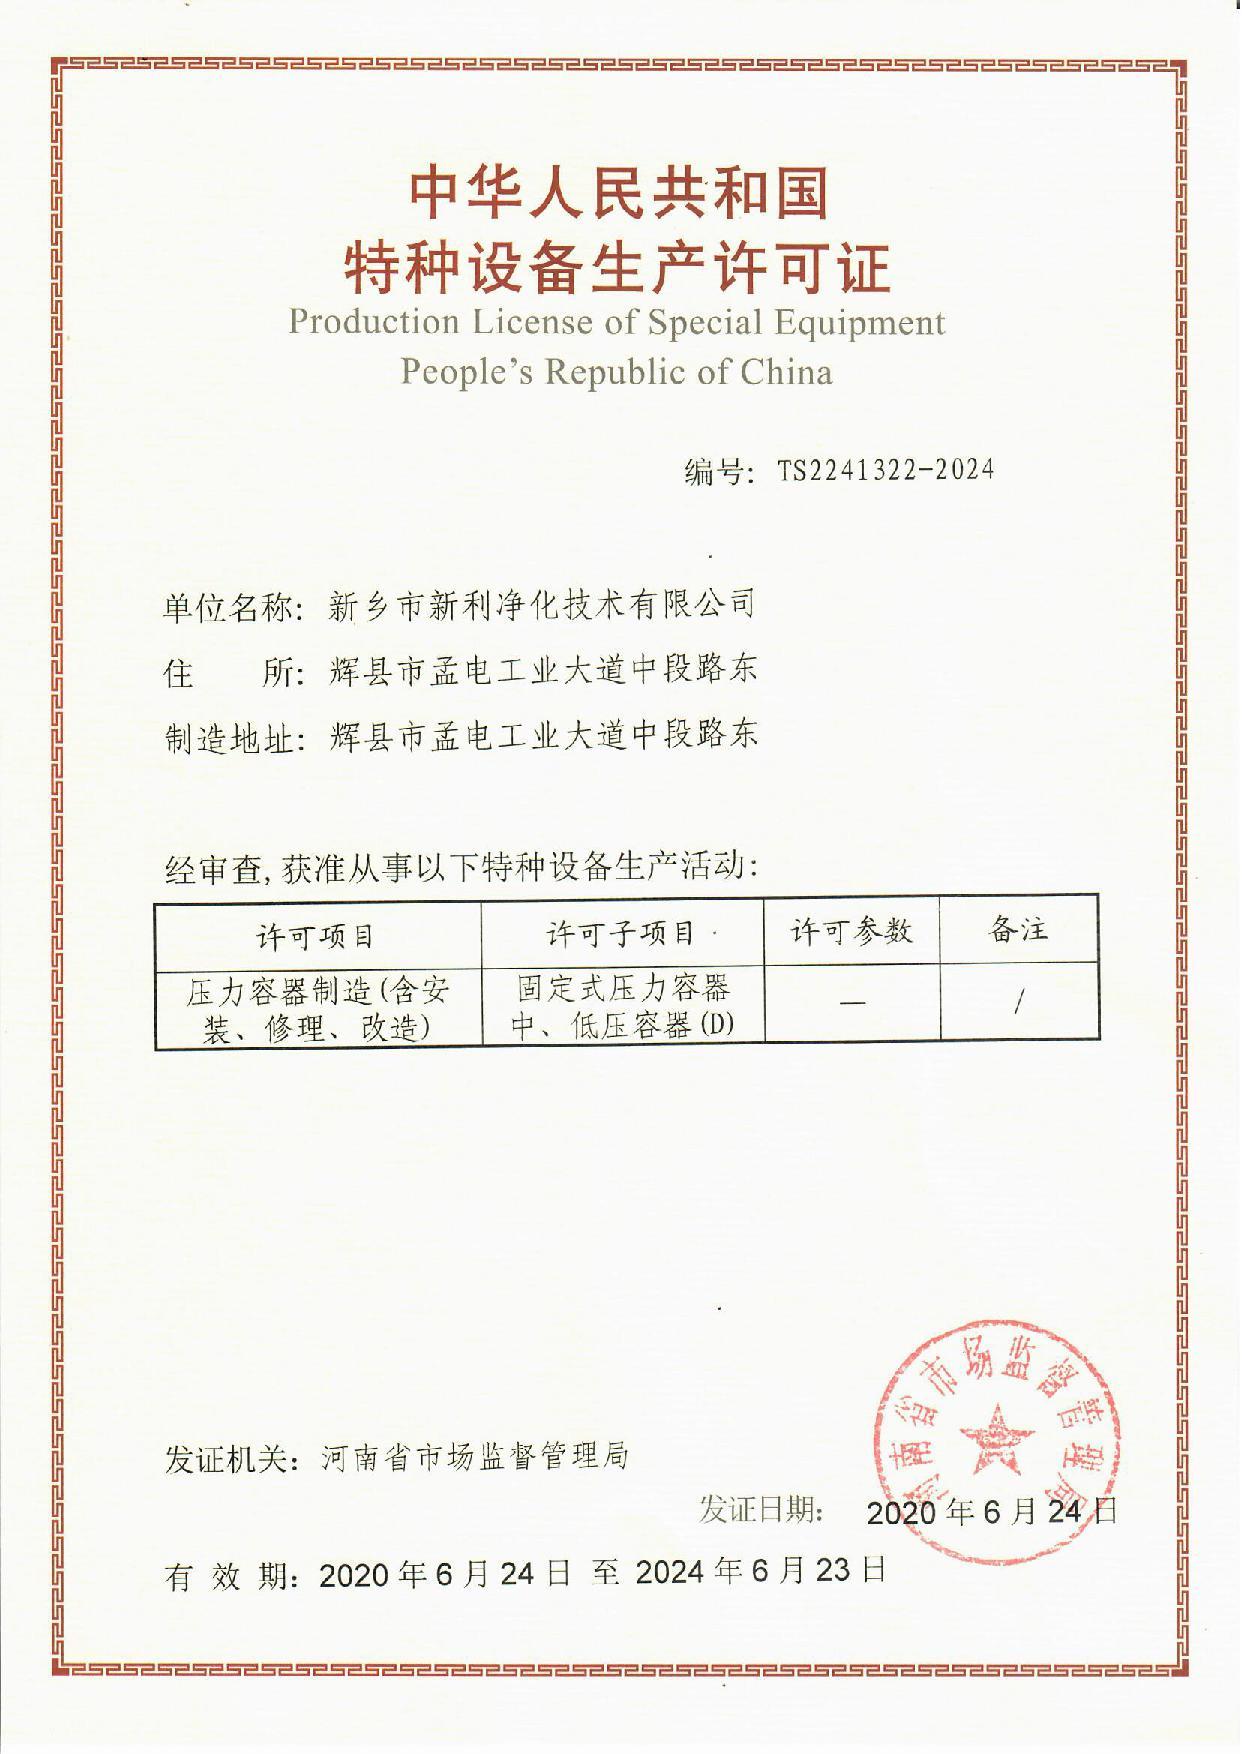 Production License of Special Equipment People's Republic of China